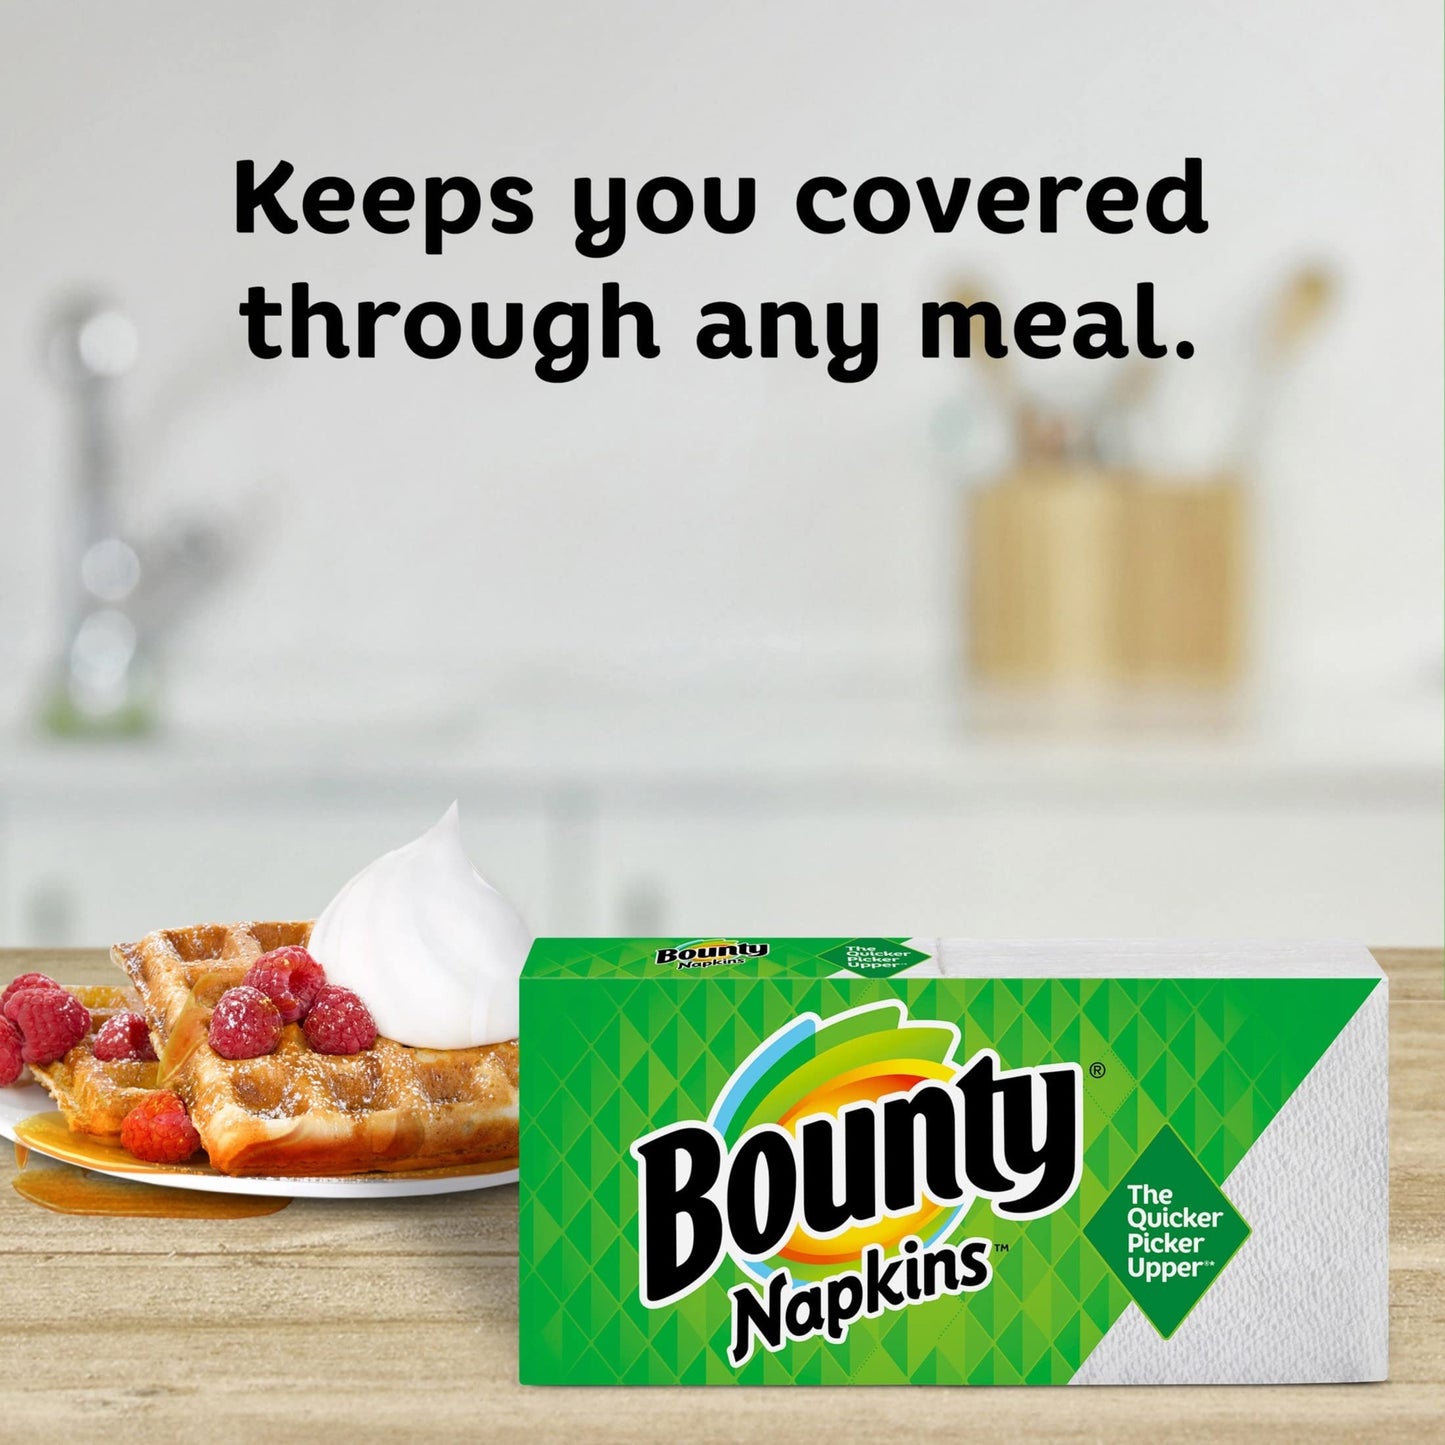 Bounty Quilted Napkins, 1-Ply, 12.1In X 12In, 100/PK, White